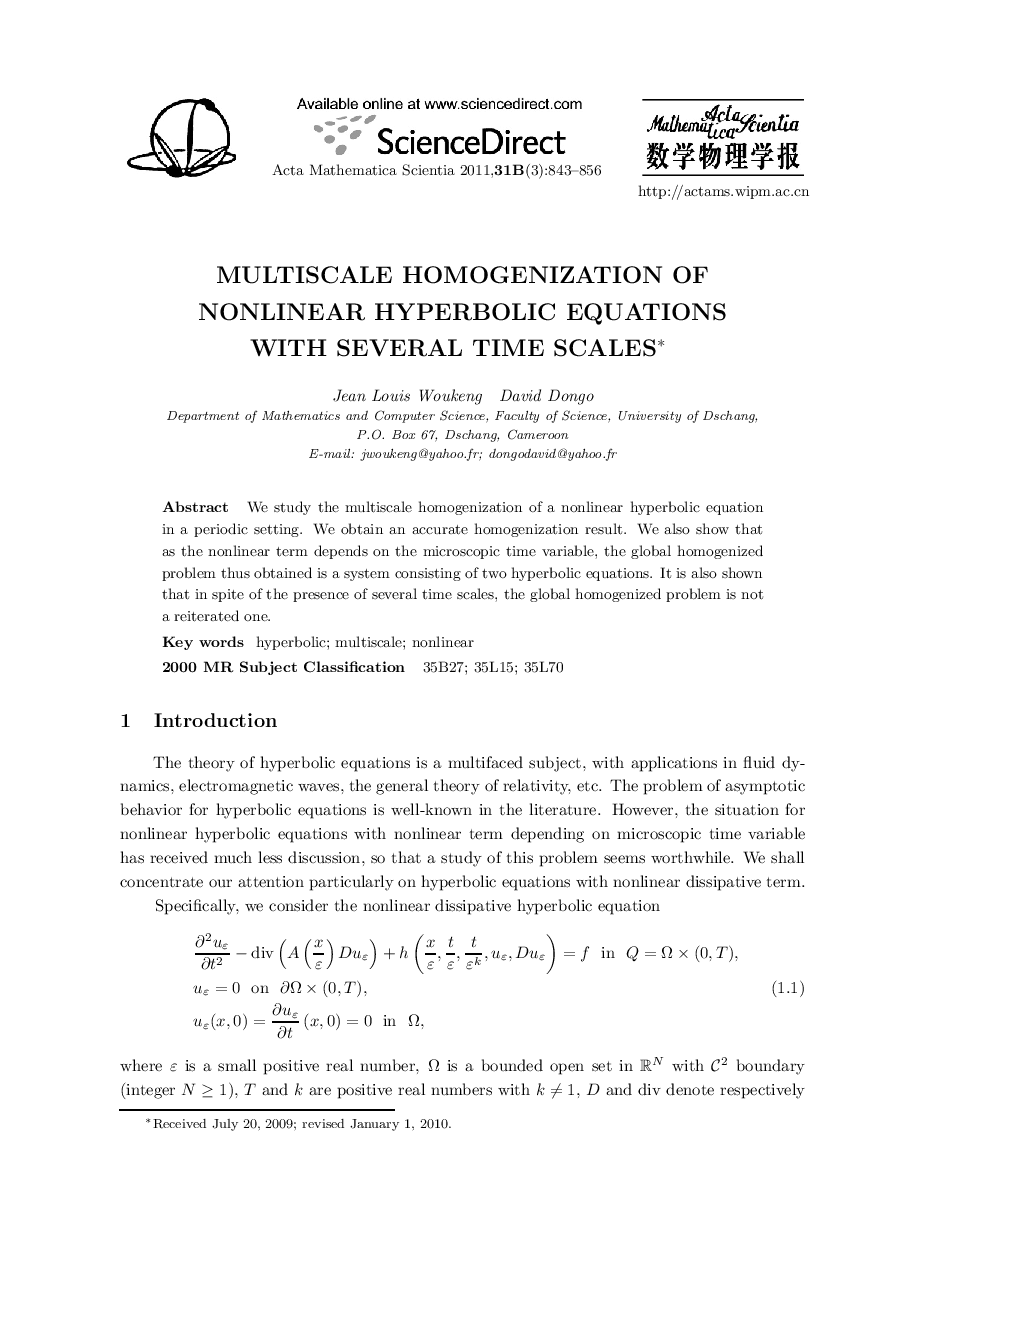 Multiscale homogenization of nonlinear hyperbolic equations with several time scales